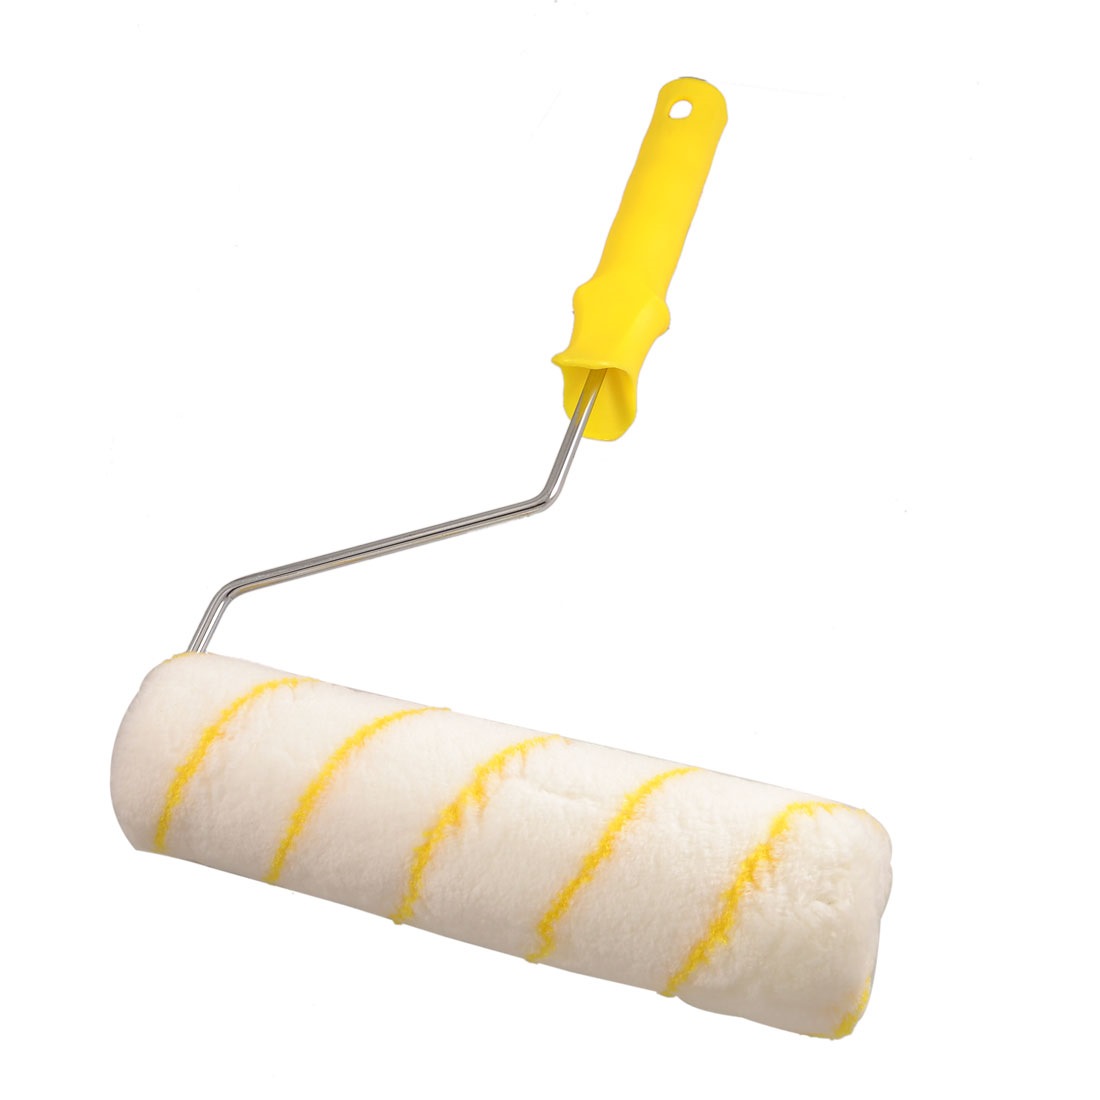 PAINT ROLLER W/HANDLE YELLOW 6  Paint Brushes, Paint Rollers